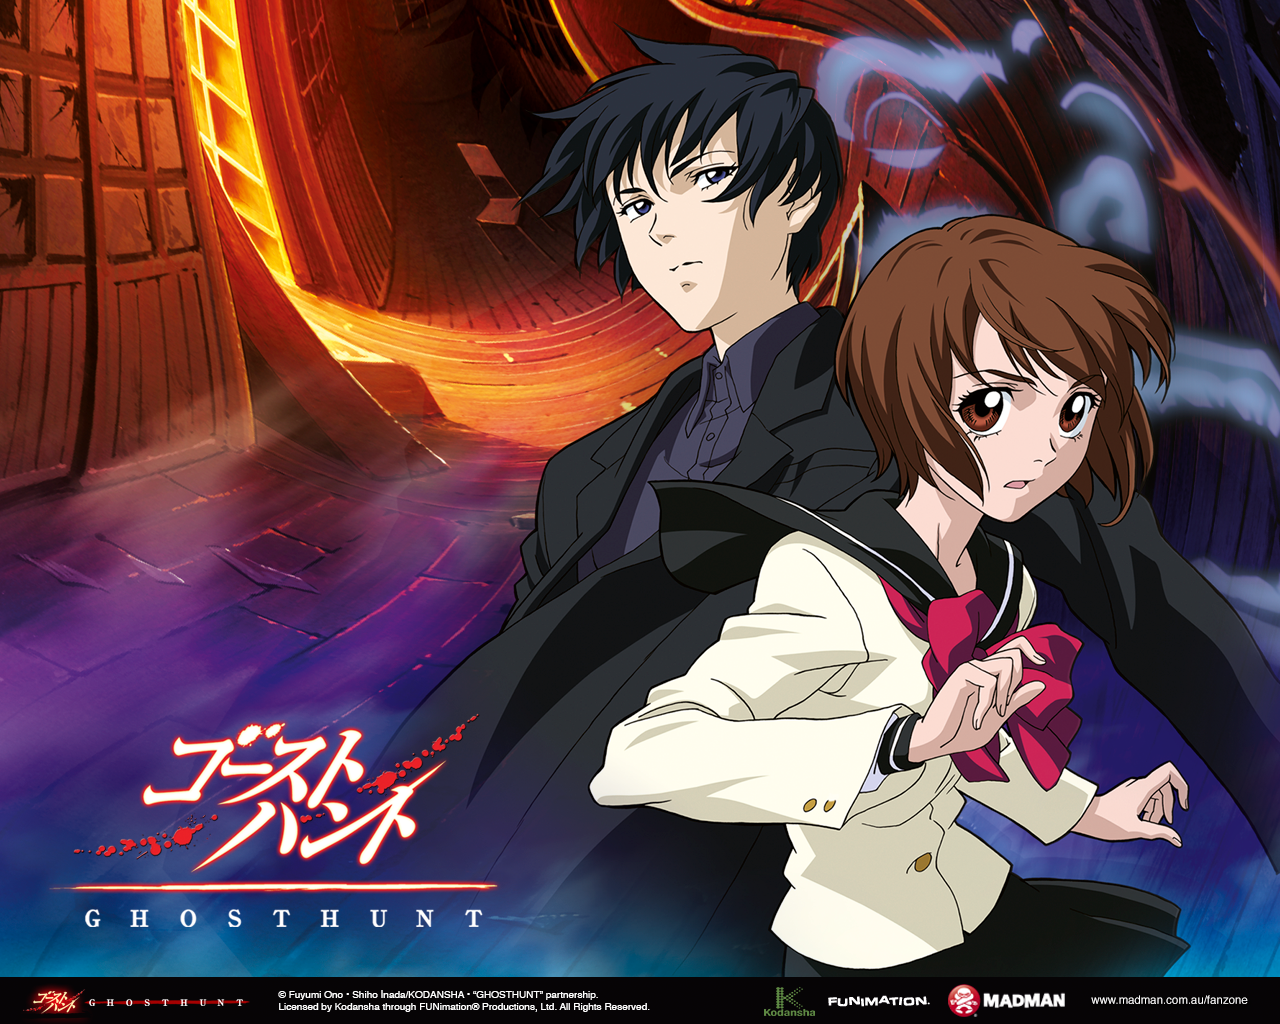 Anime like Ghost Hunt [Updated Recommendations]. Ghost hunt anime, Anime ghost, Ghost hunting